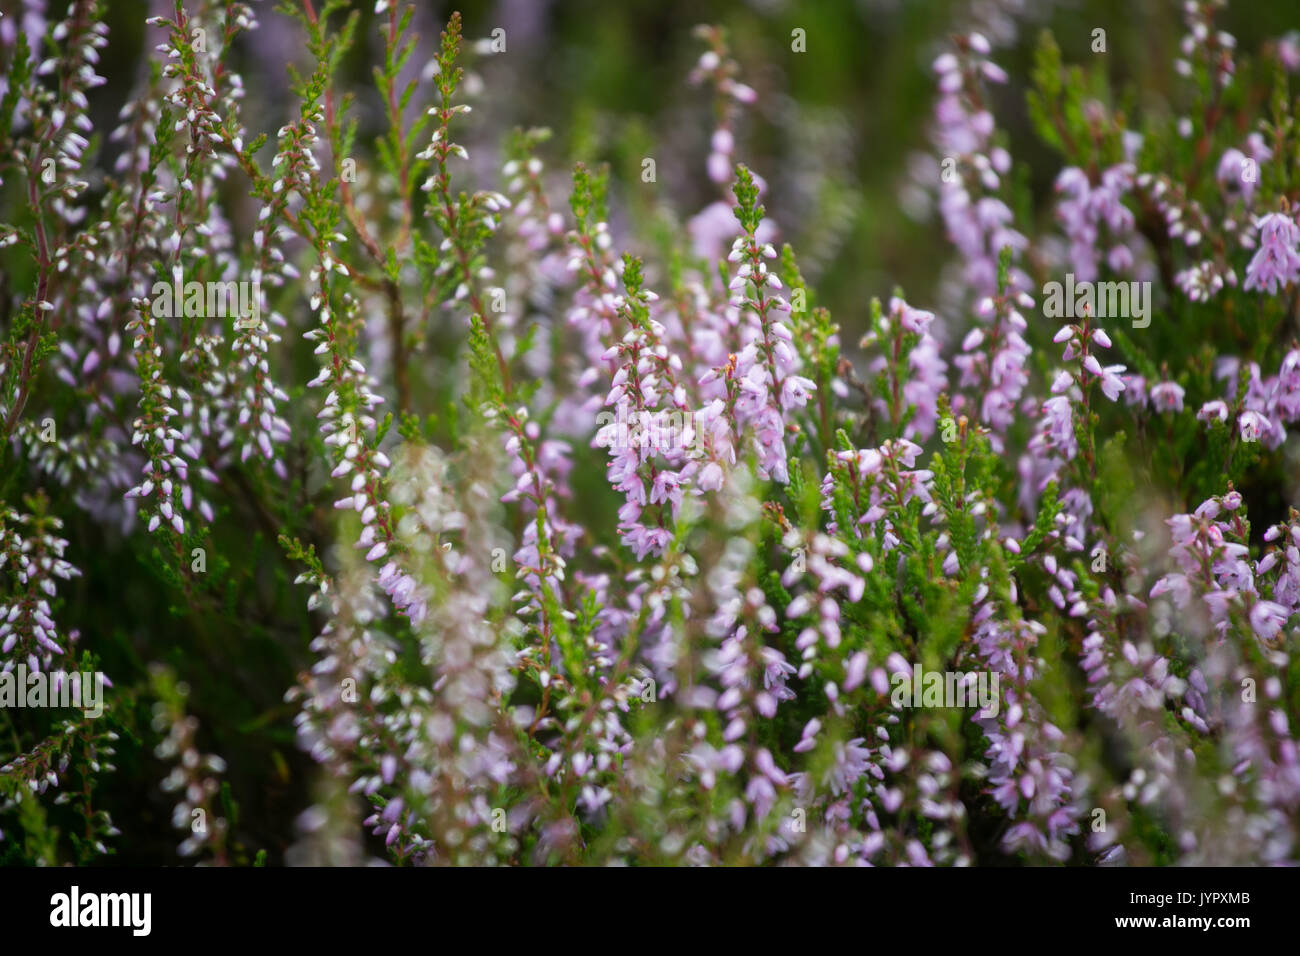 Heather on moorland in the Borders of Scotland. The hills are popular hunting ground for grouse. Stock Photo